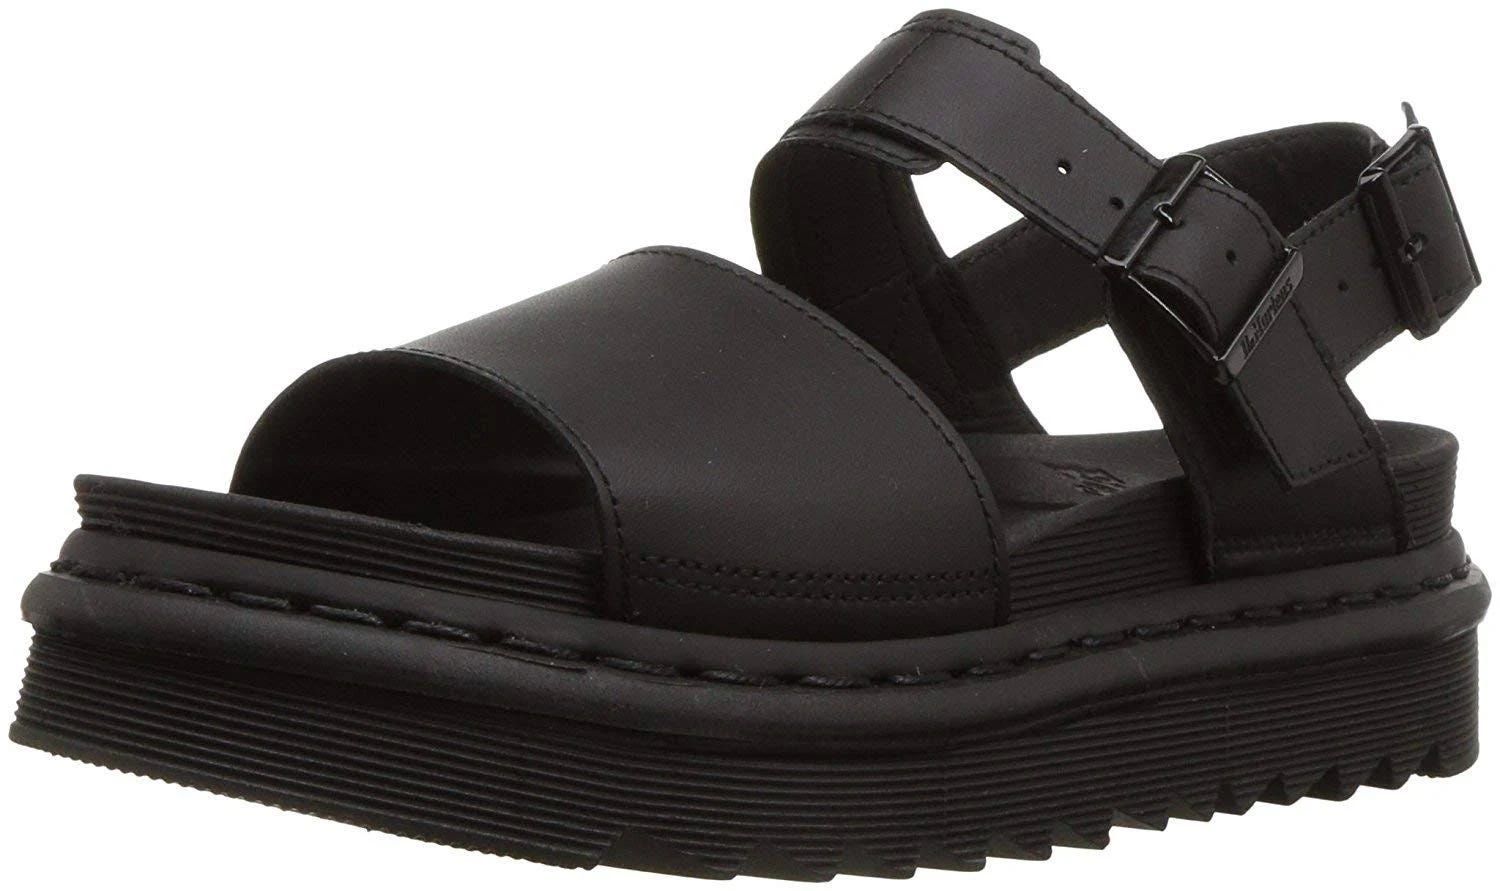 Black Patent Leather Chunky Sandals for Women by Dr. Martens | Image